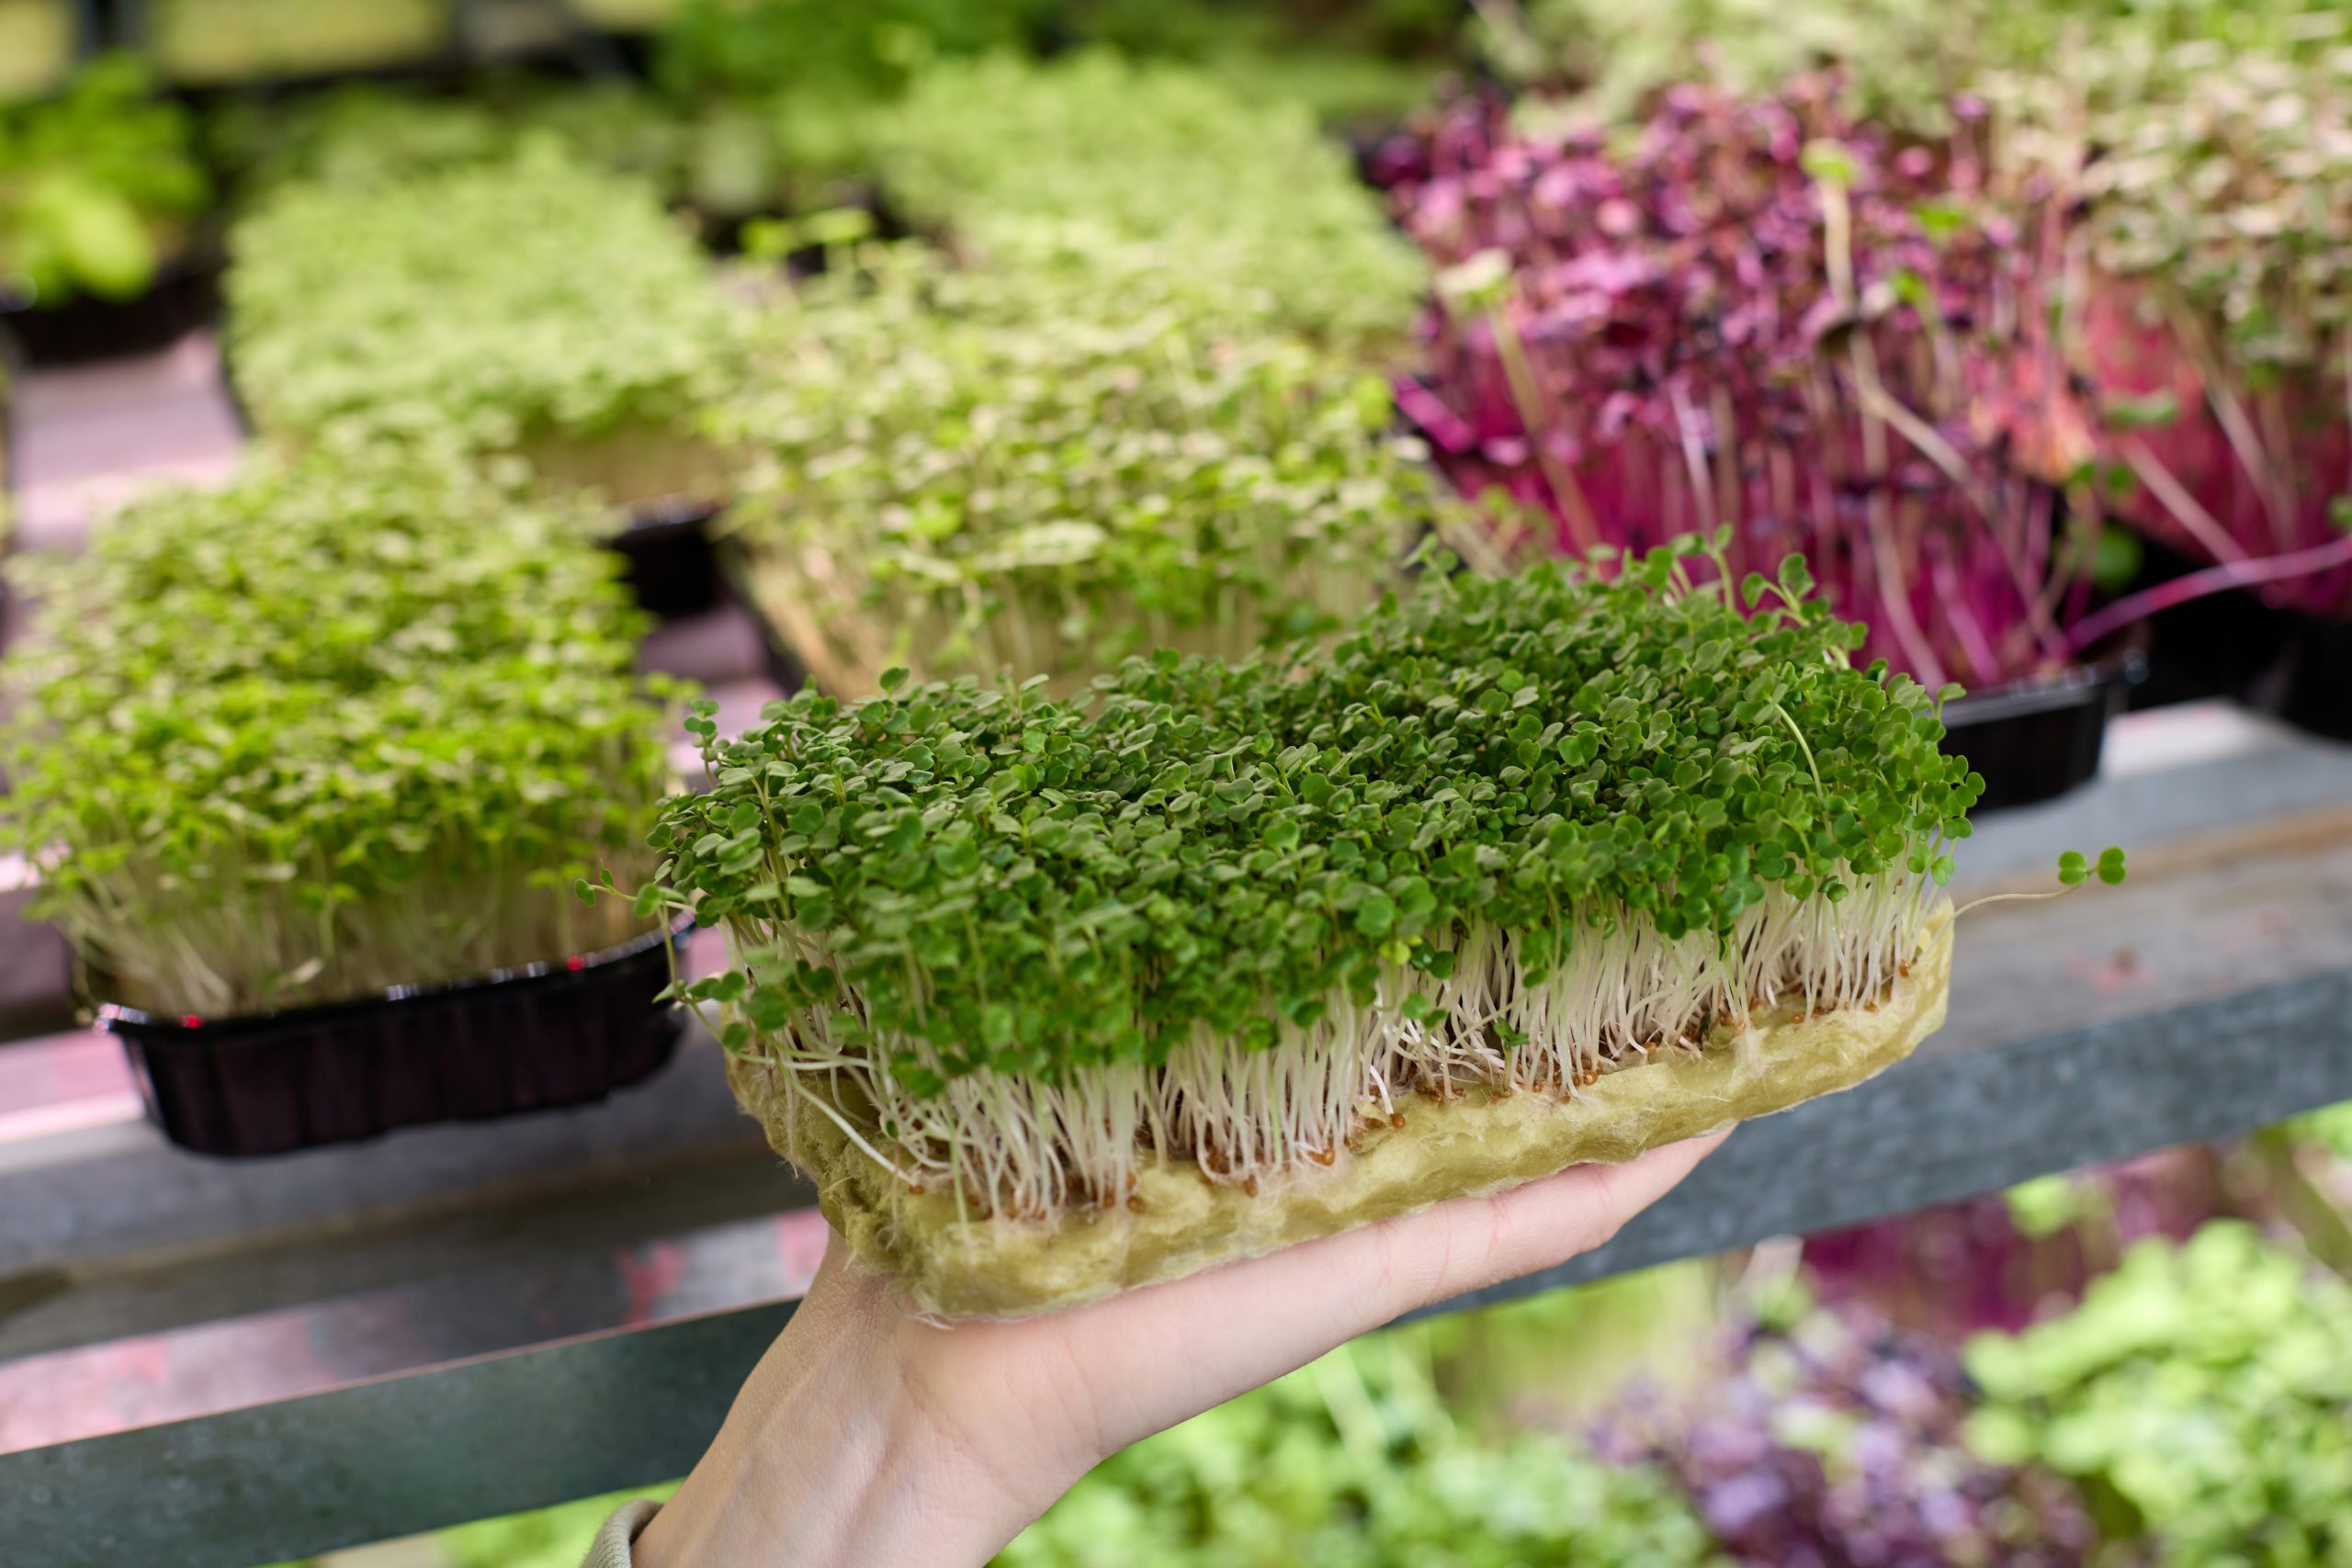 which microgreen is the healthiest